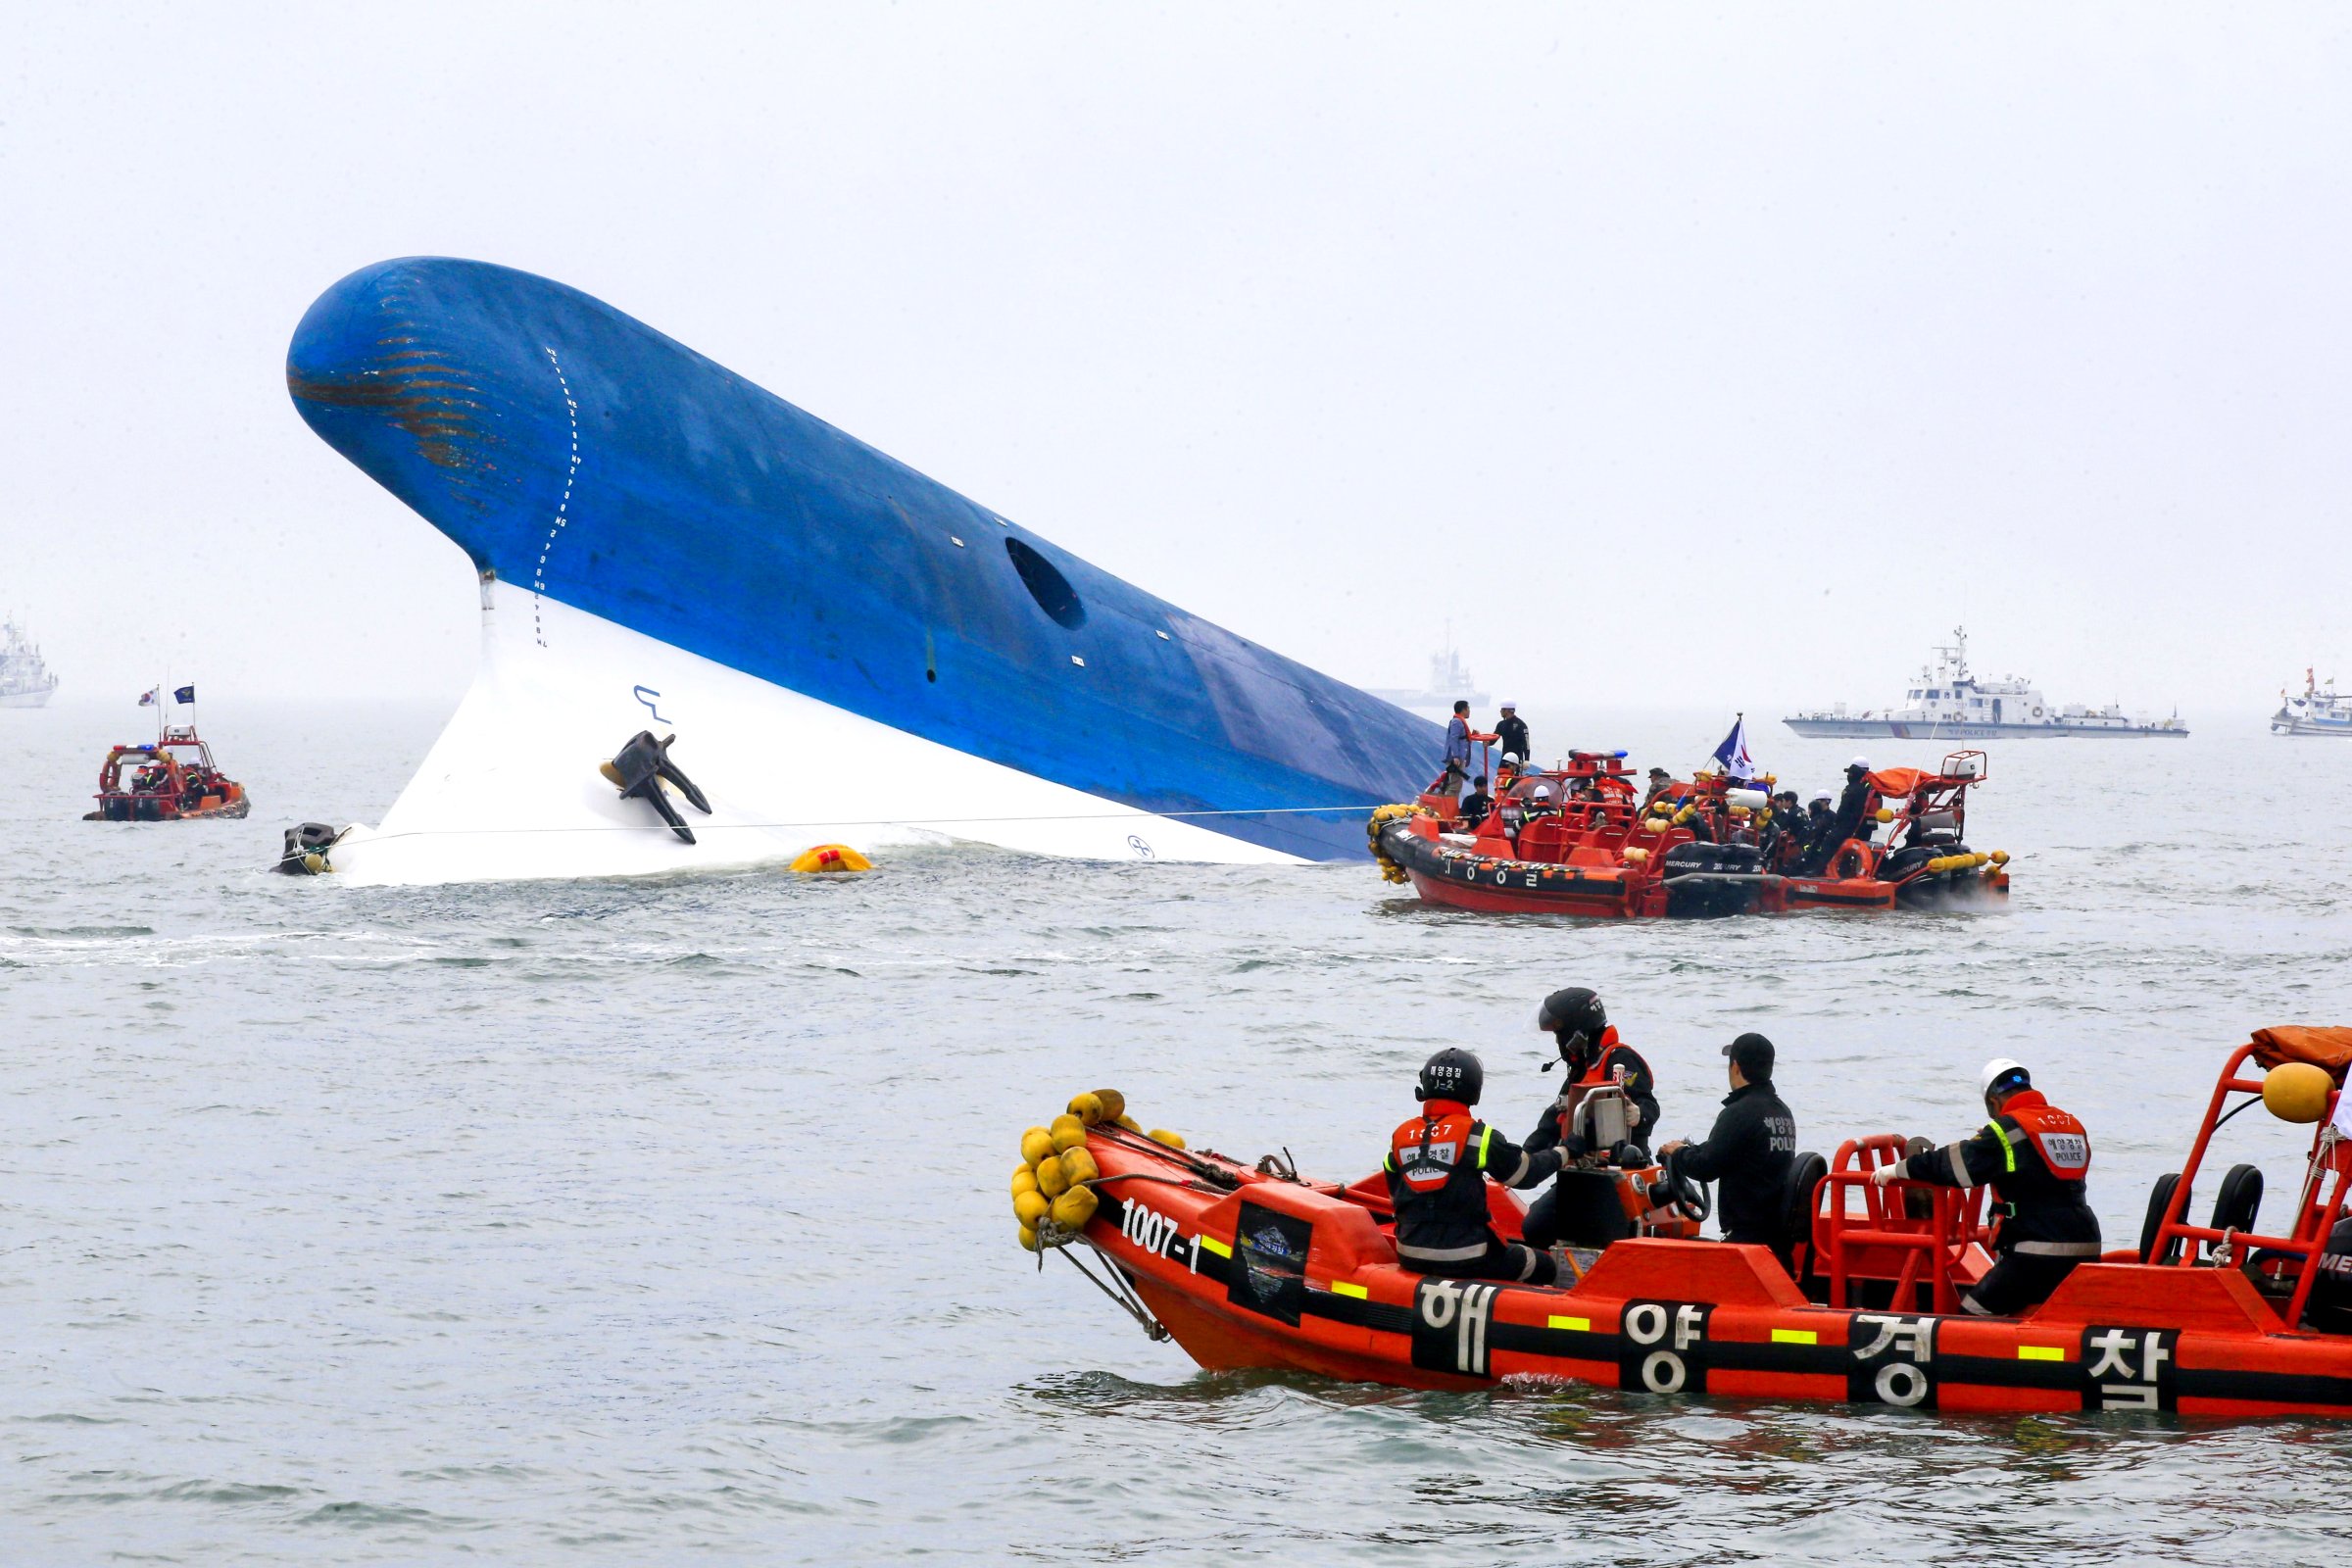 Coast guard members search for passengers near a South Korean ferry that capsized on its way to Jeju island from Incheon on April 16, 2014.